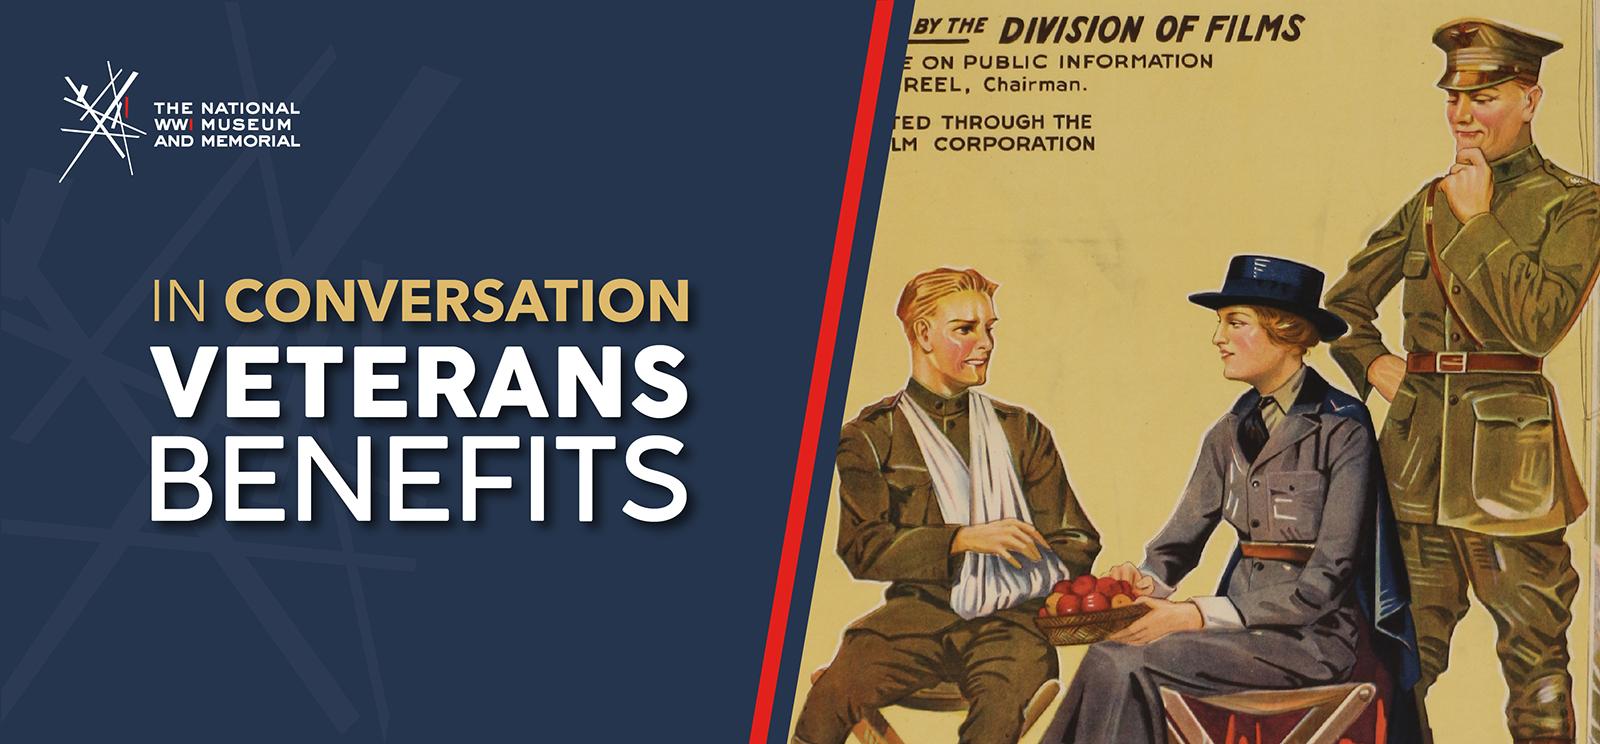 Image: A painting of three people. One is a seated white man in military uniform with his arm in a sling. Seated next to him is a white woman in military uniform sharing a basket of fruit. Standing behind her is a white man in military uniform looking thoughtful. Text: 'In Conversation / Veterans Benefits'